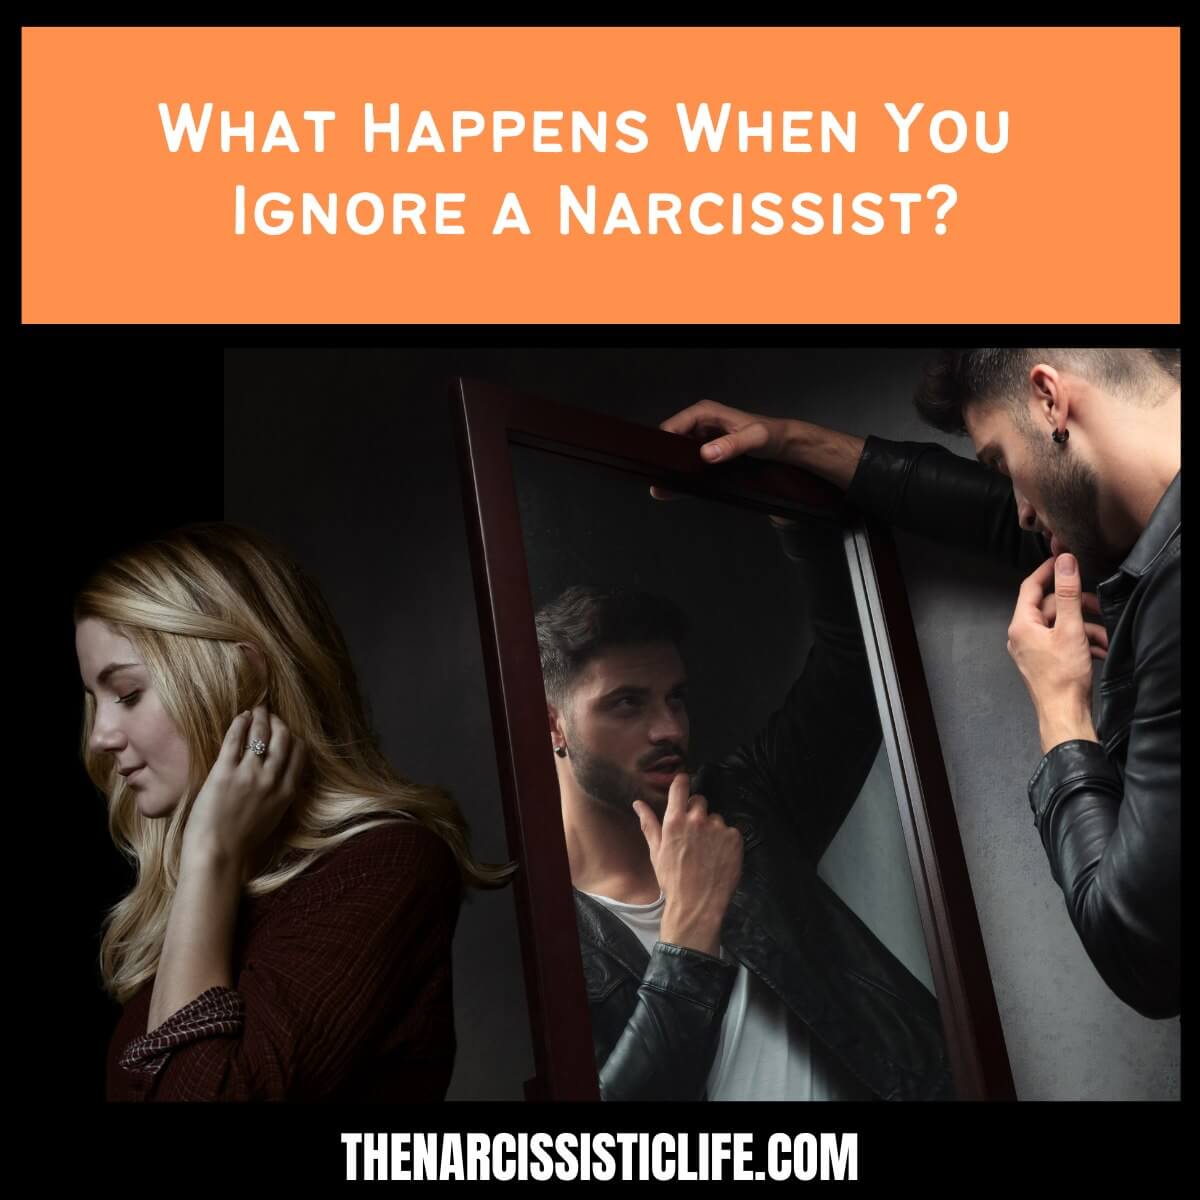 What Happens When You Ignore a Narcissist